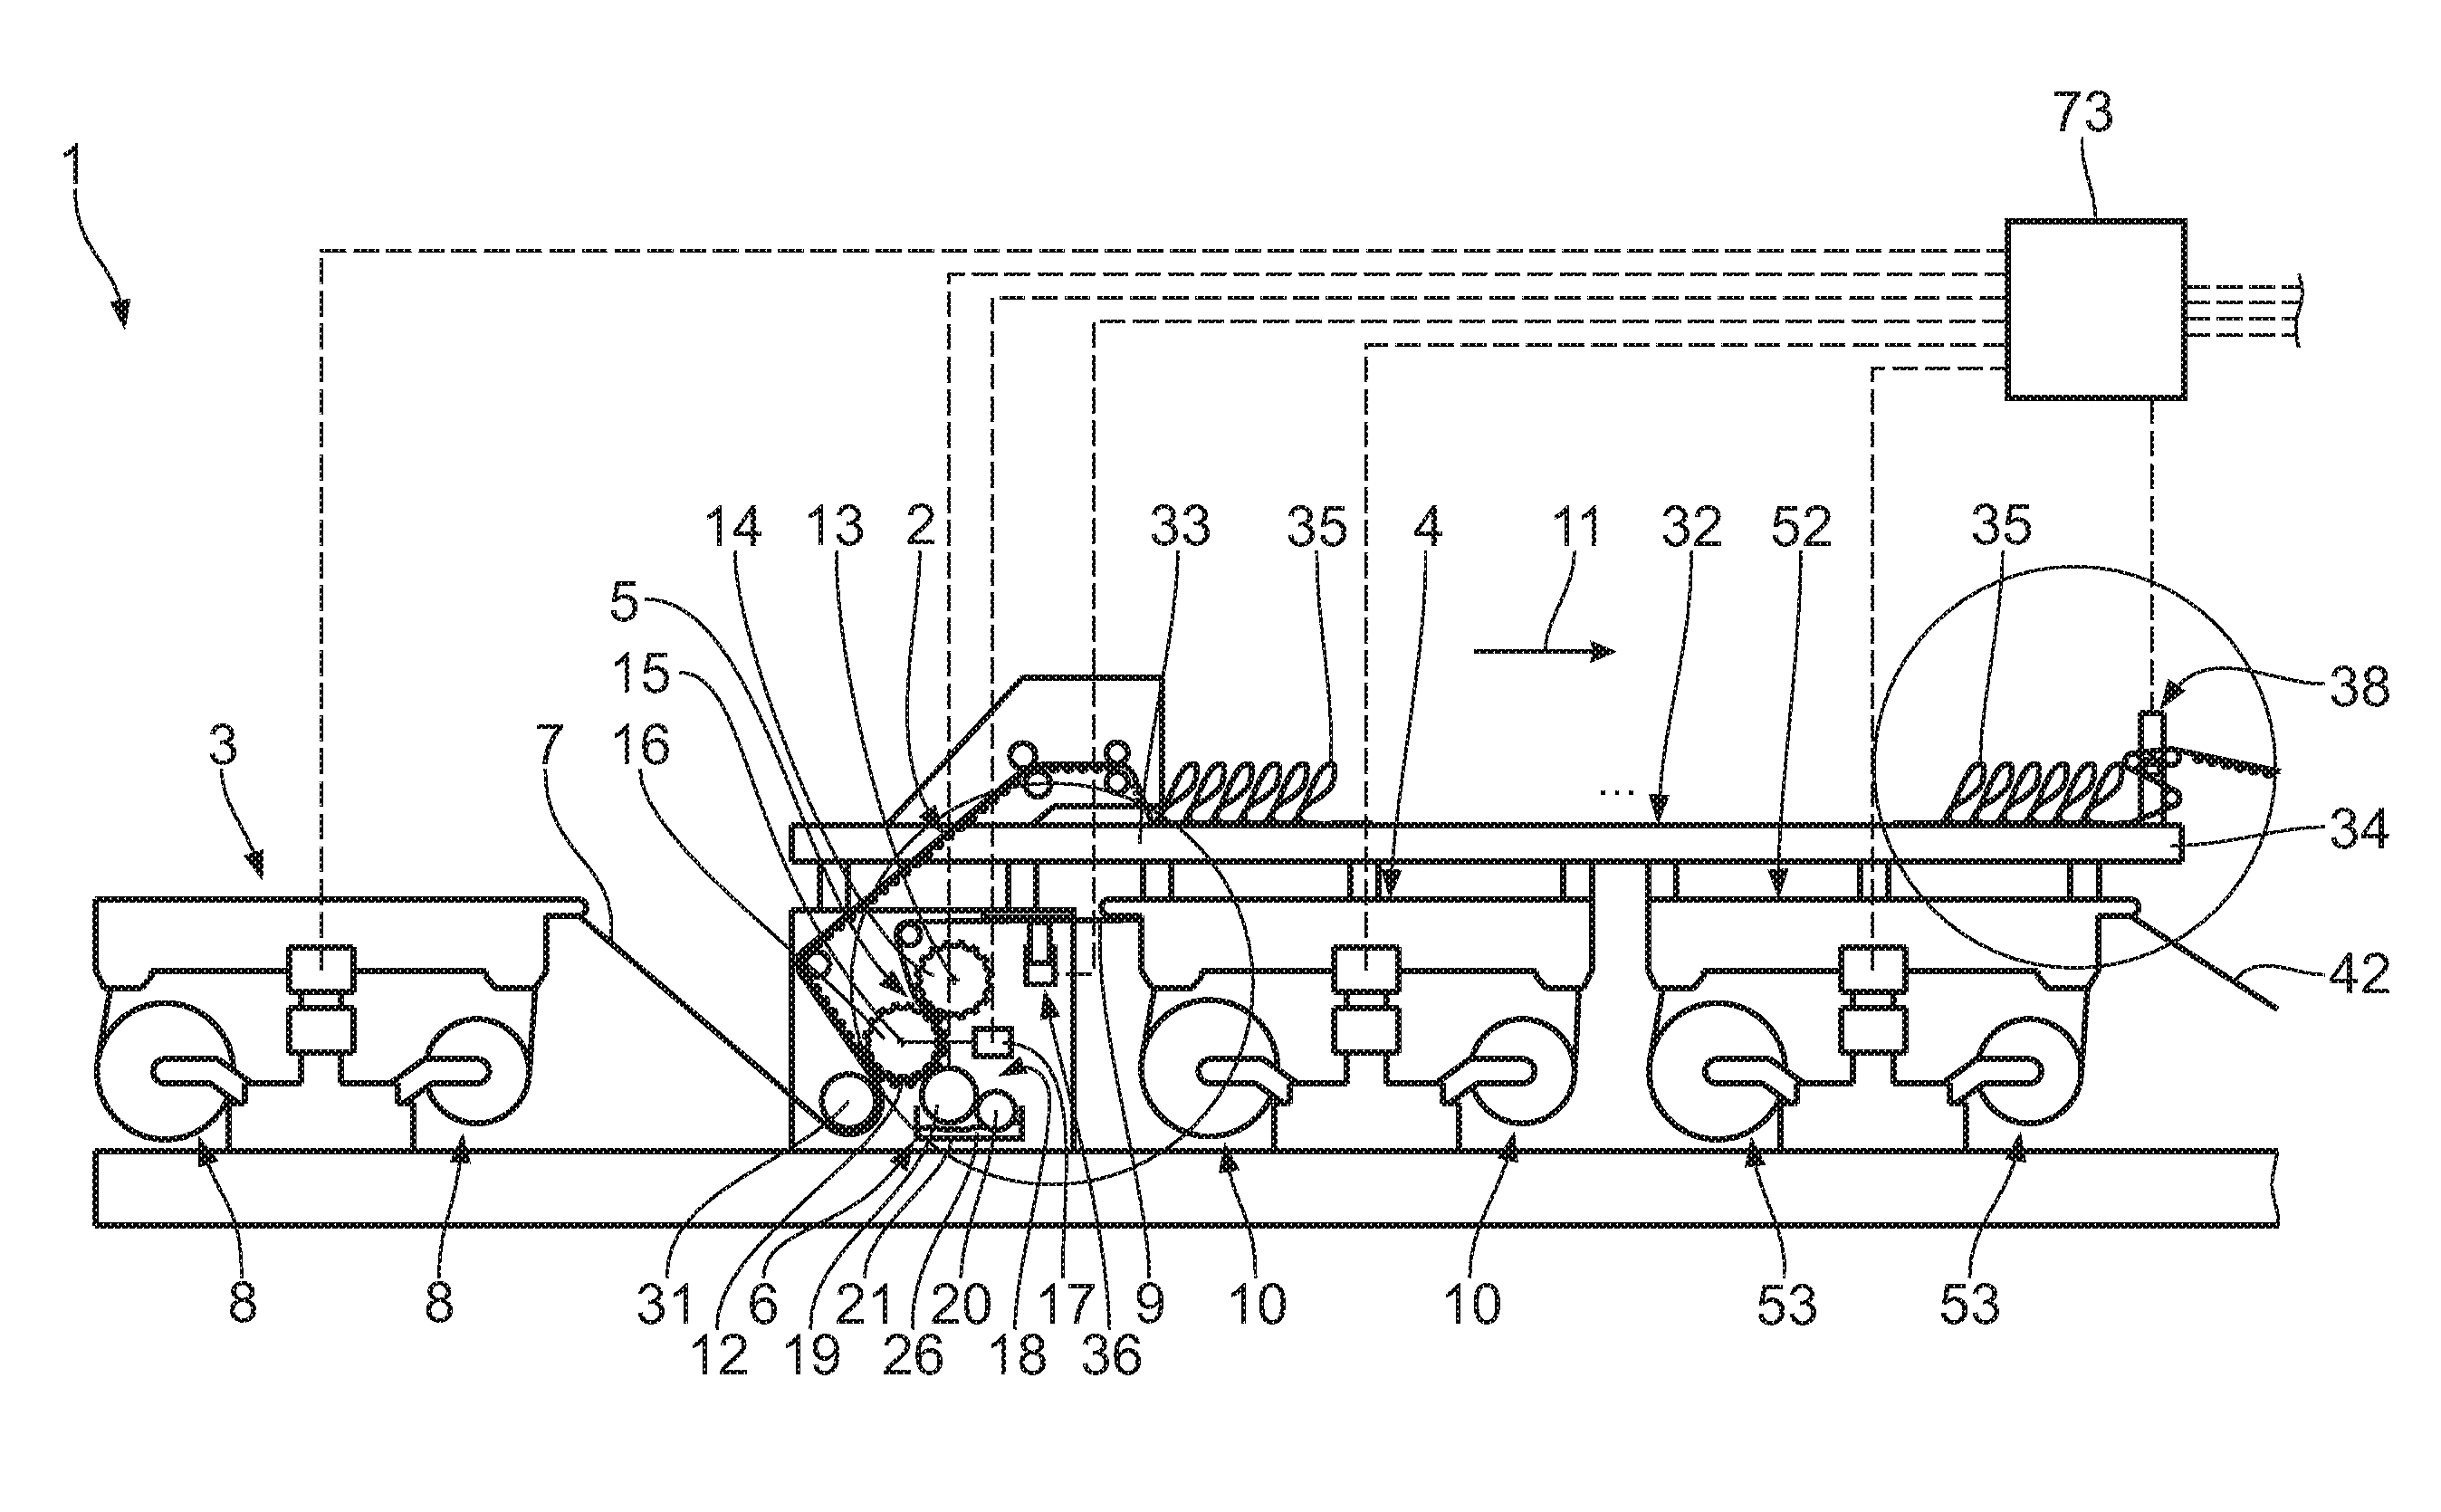 Corrugated cardboard machine and method of producing an endless web of corrugated cardboard